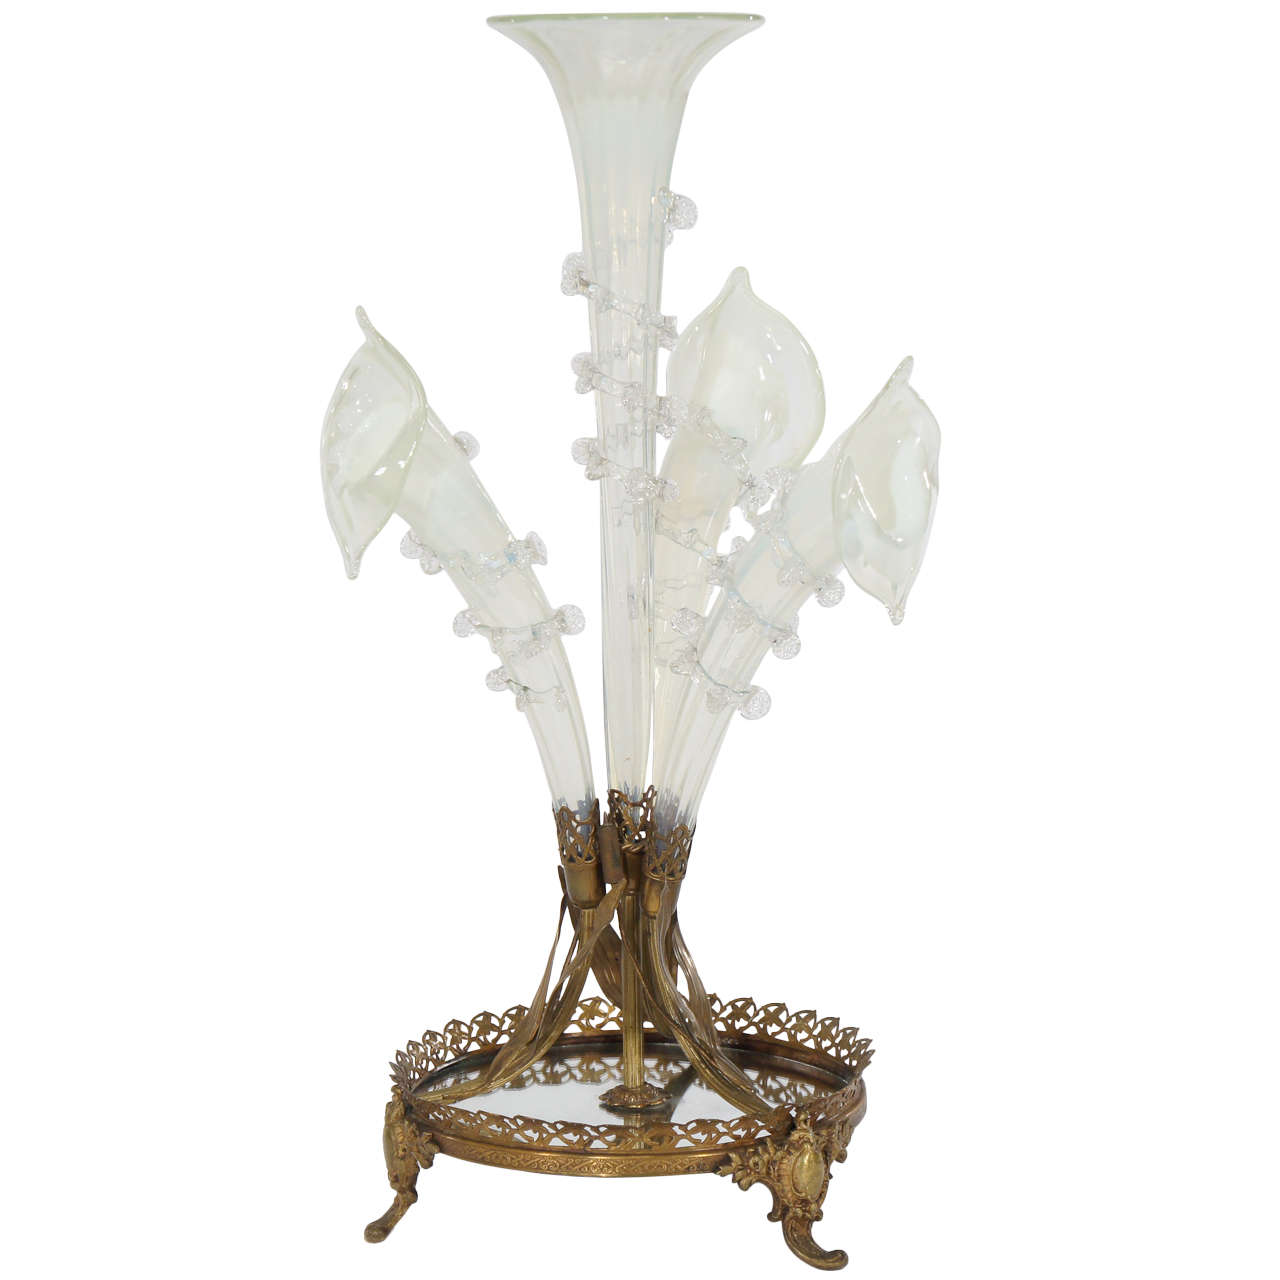 Outstanding Art Nouveau Calla Lily 19th Century Epergne on Plateau